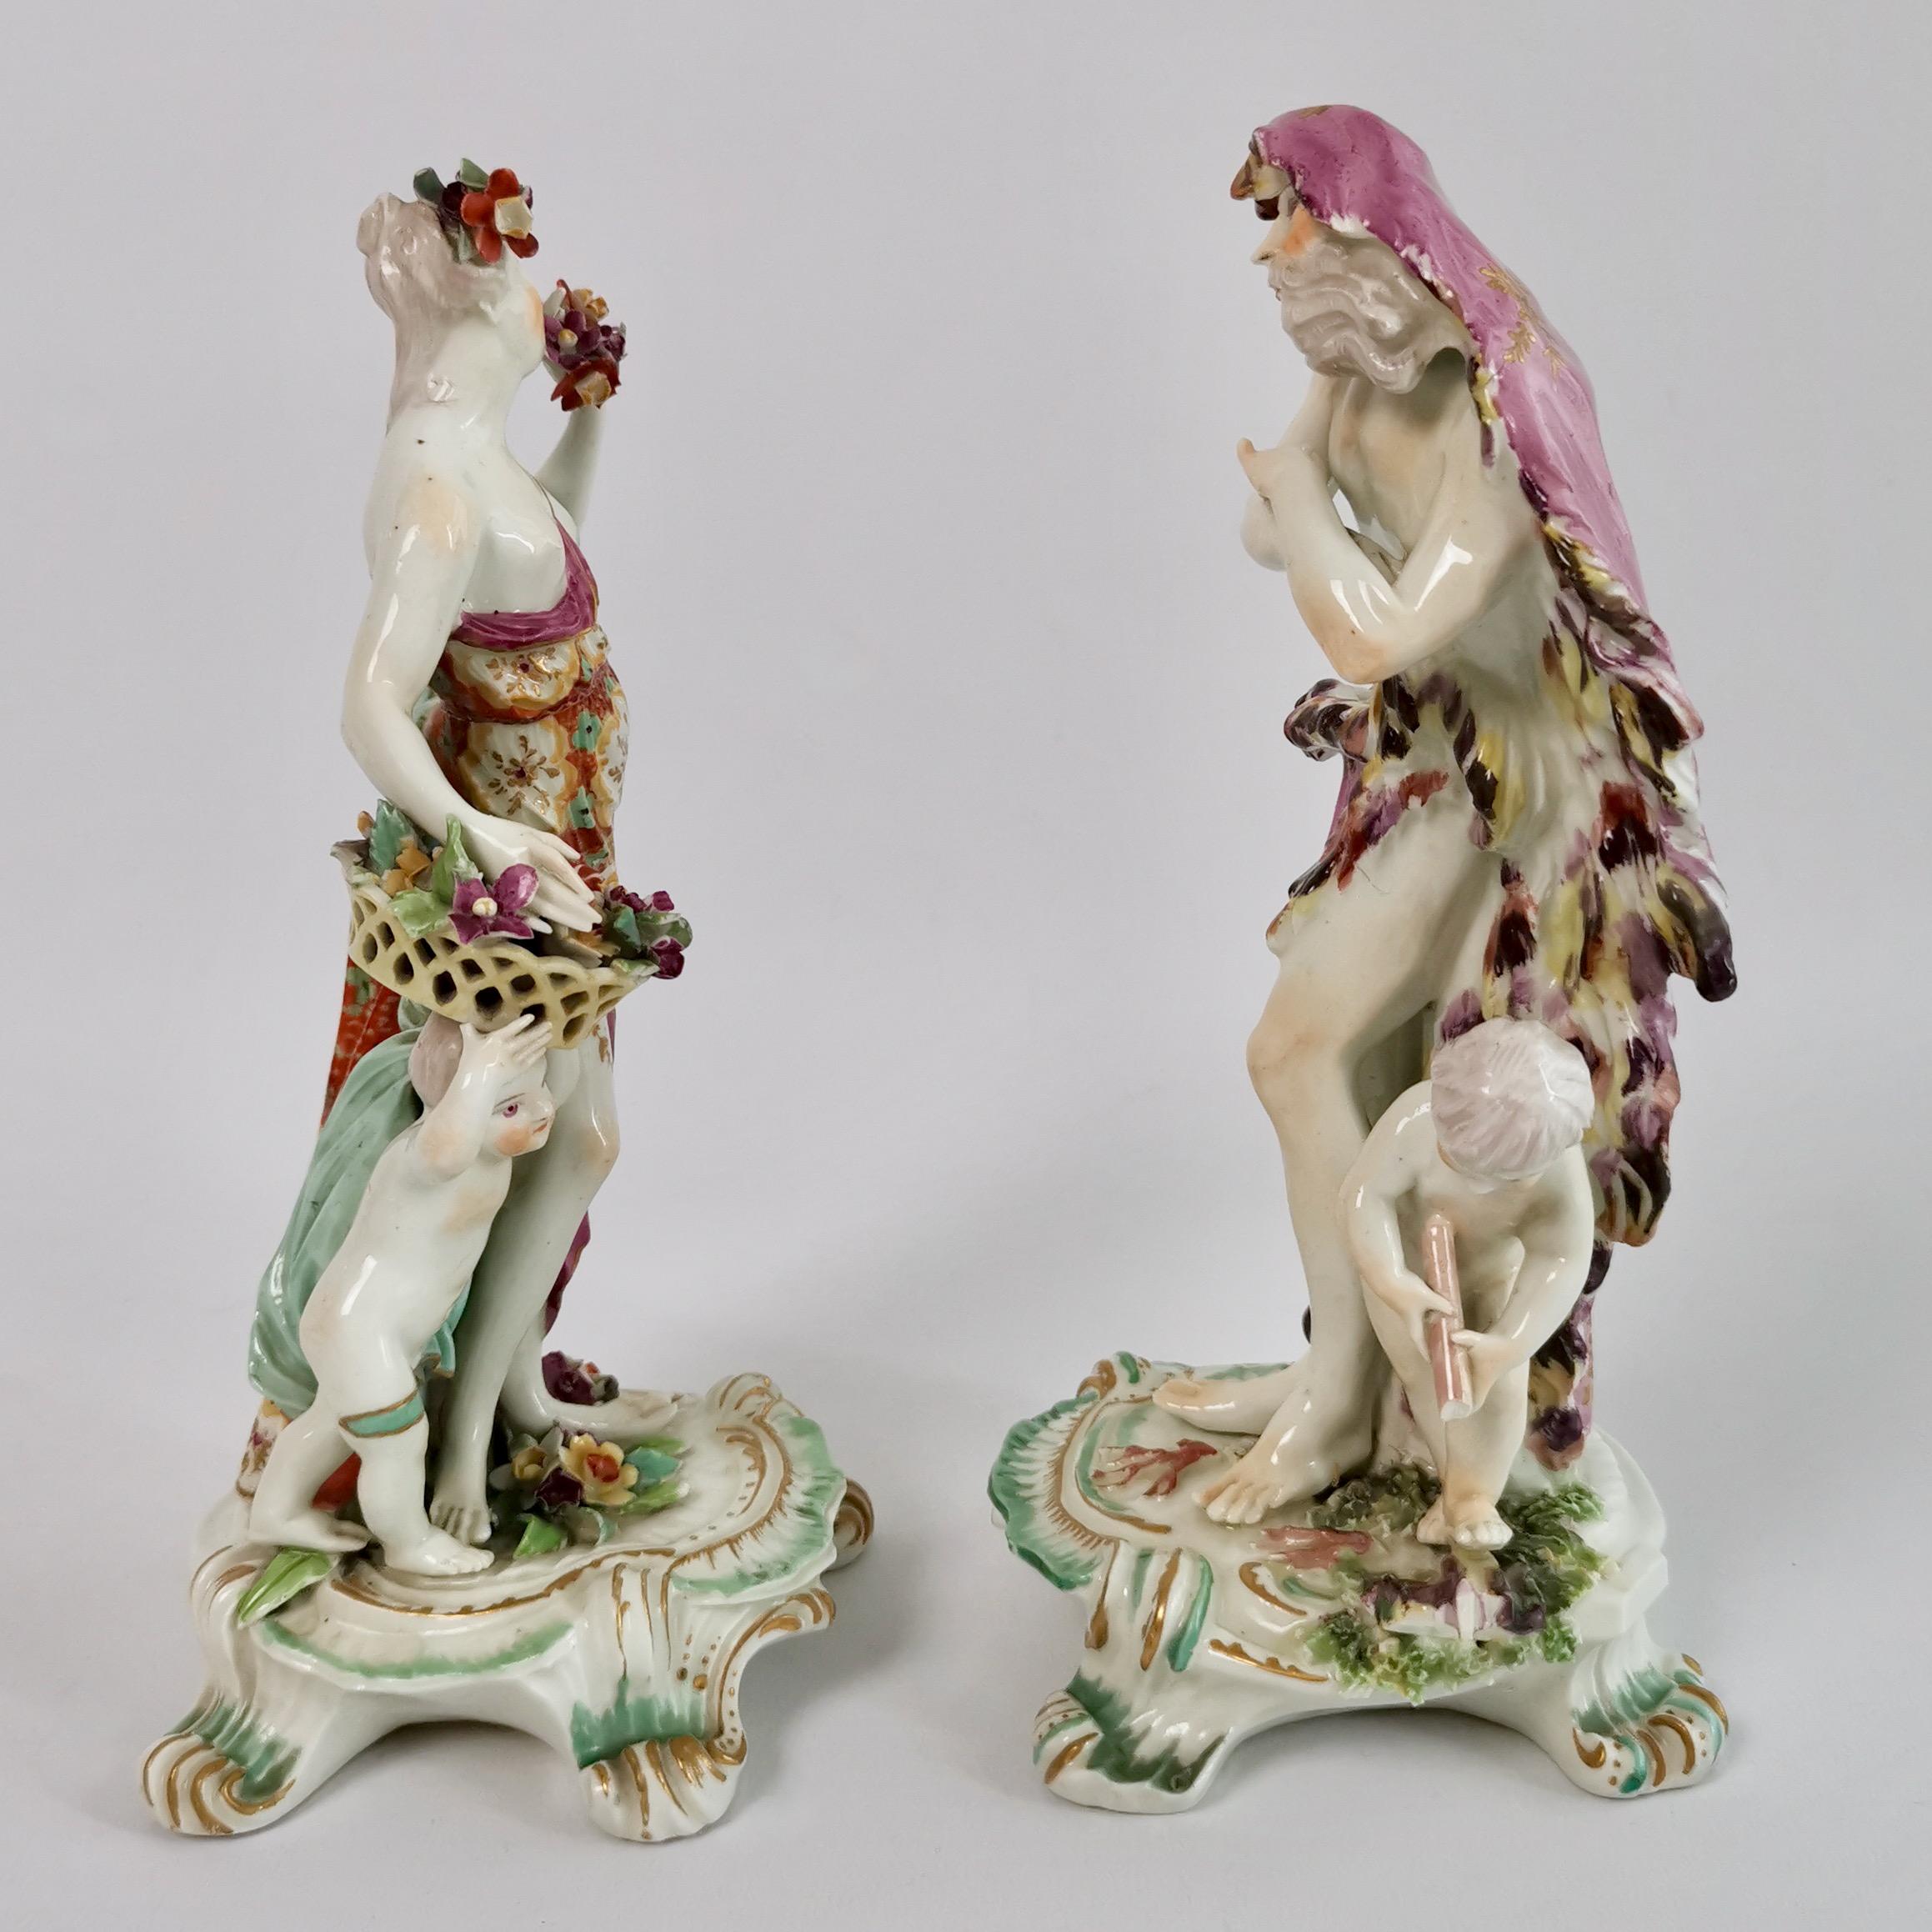 English Derby Pair of Porcelain Figures of Winter and Spring, Rococo Period 1756-1759